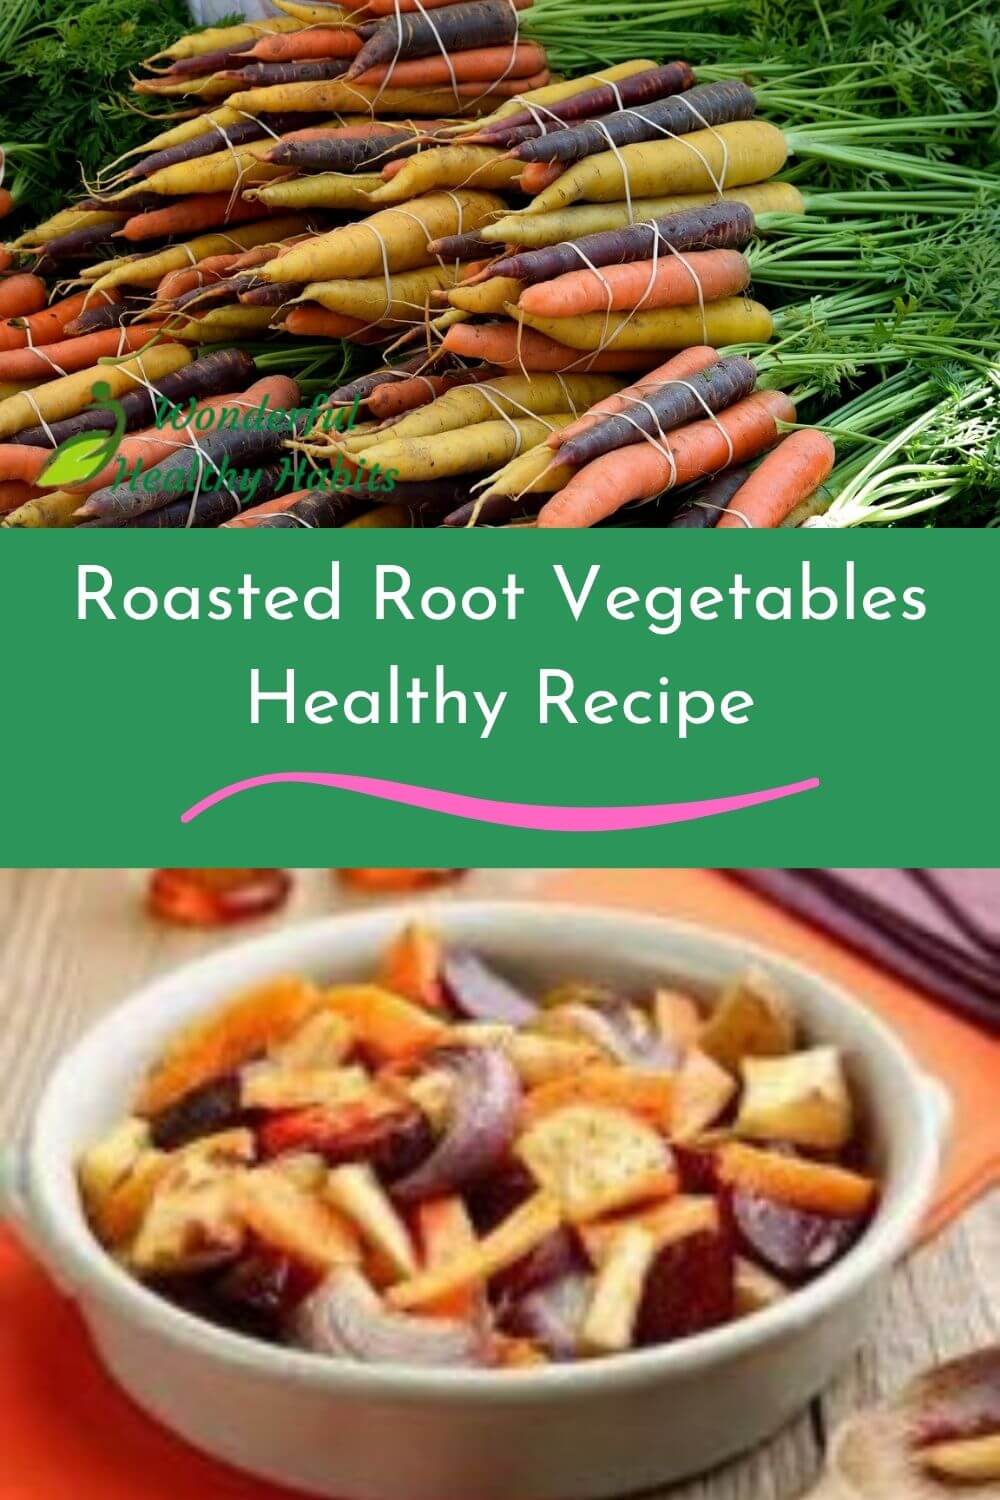 Roasted Root Vegetables Healthy Recipe